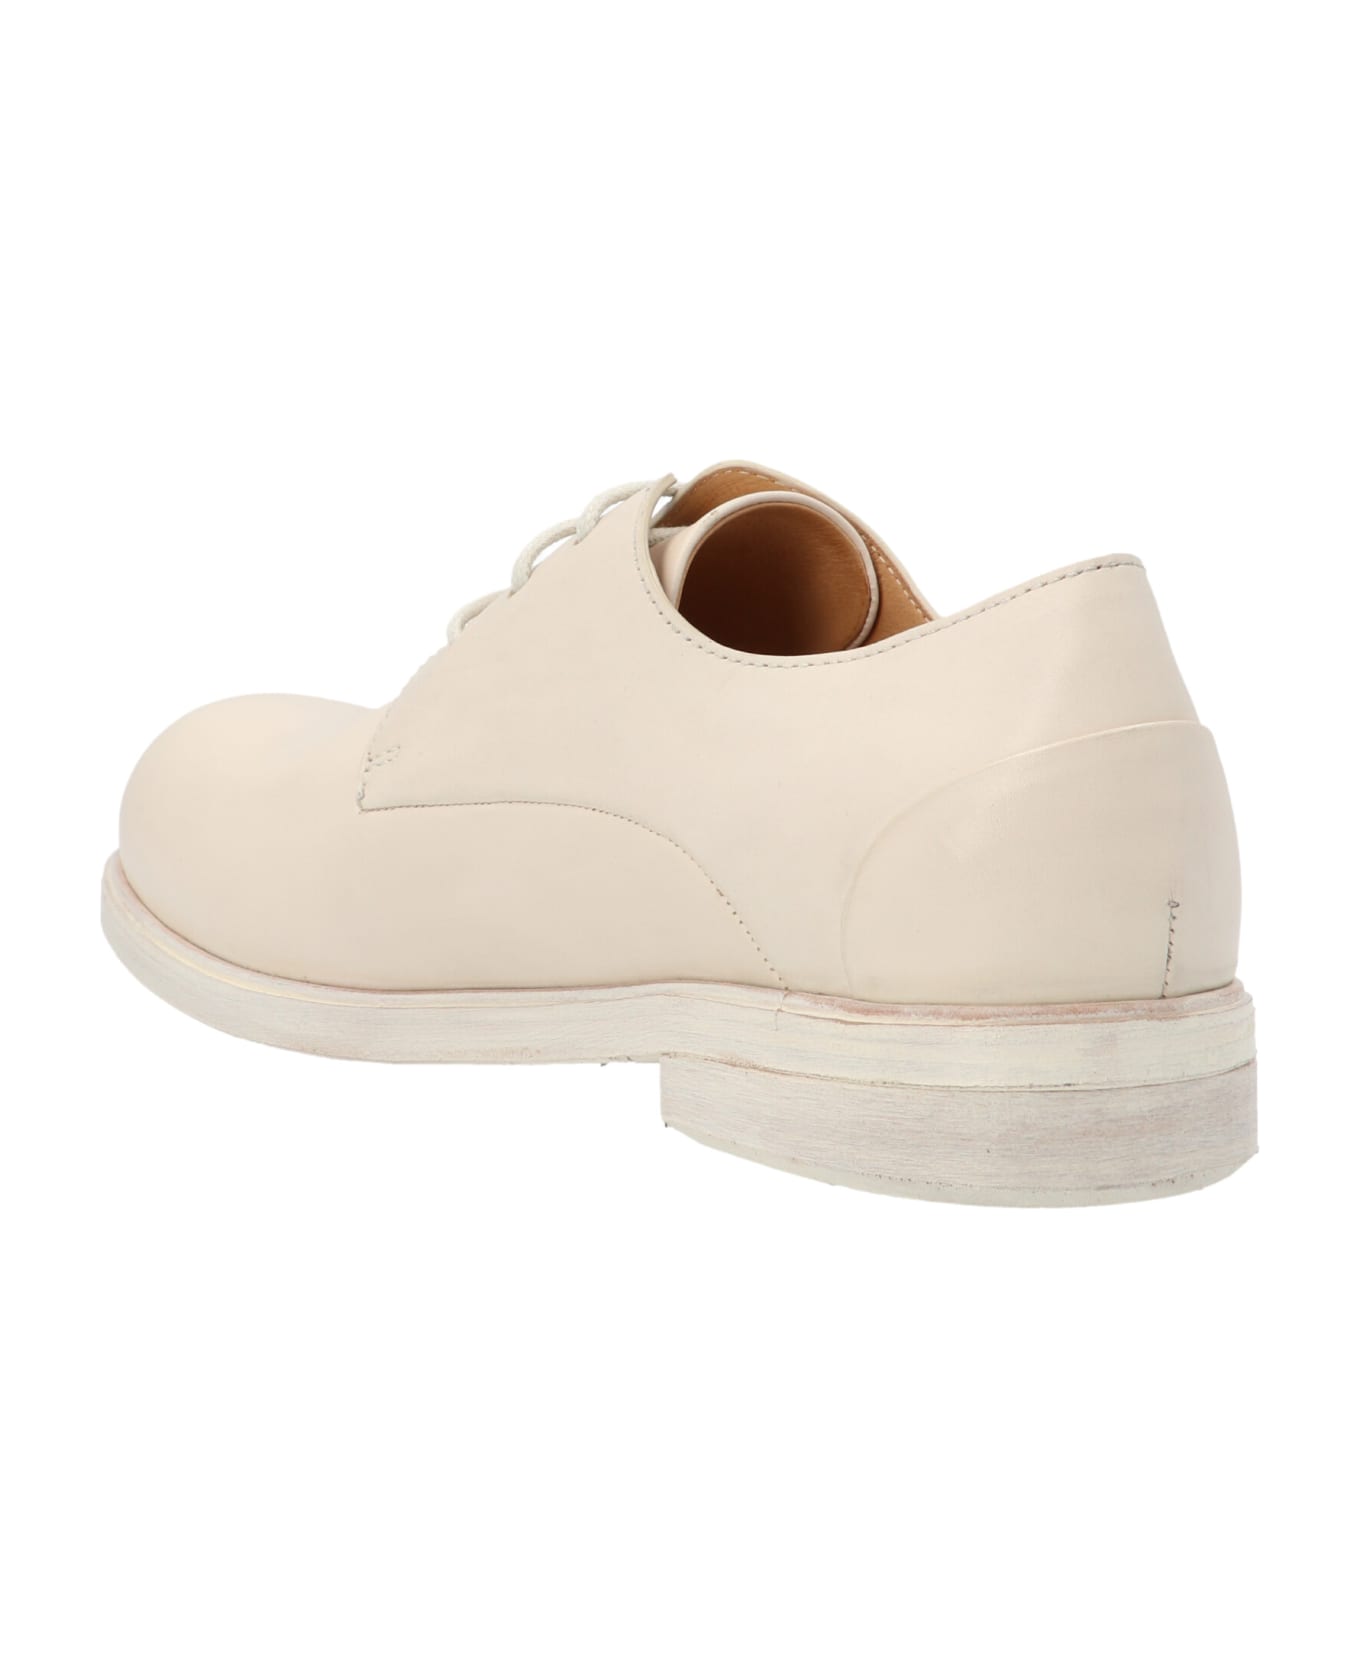 Marsell Zucca Media' Derby Shoes - White